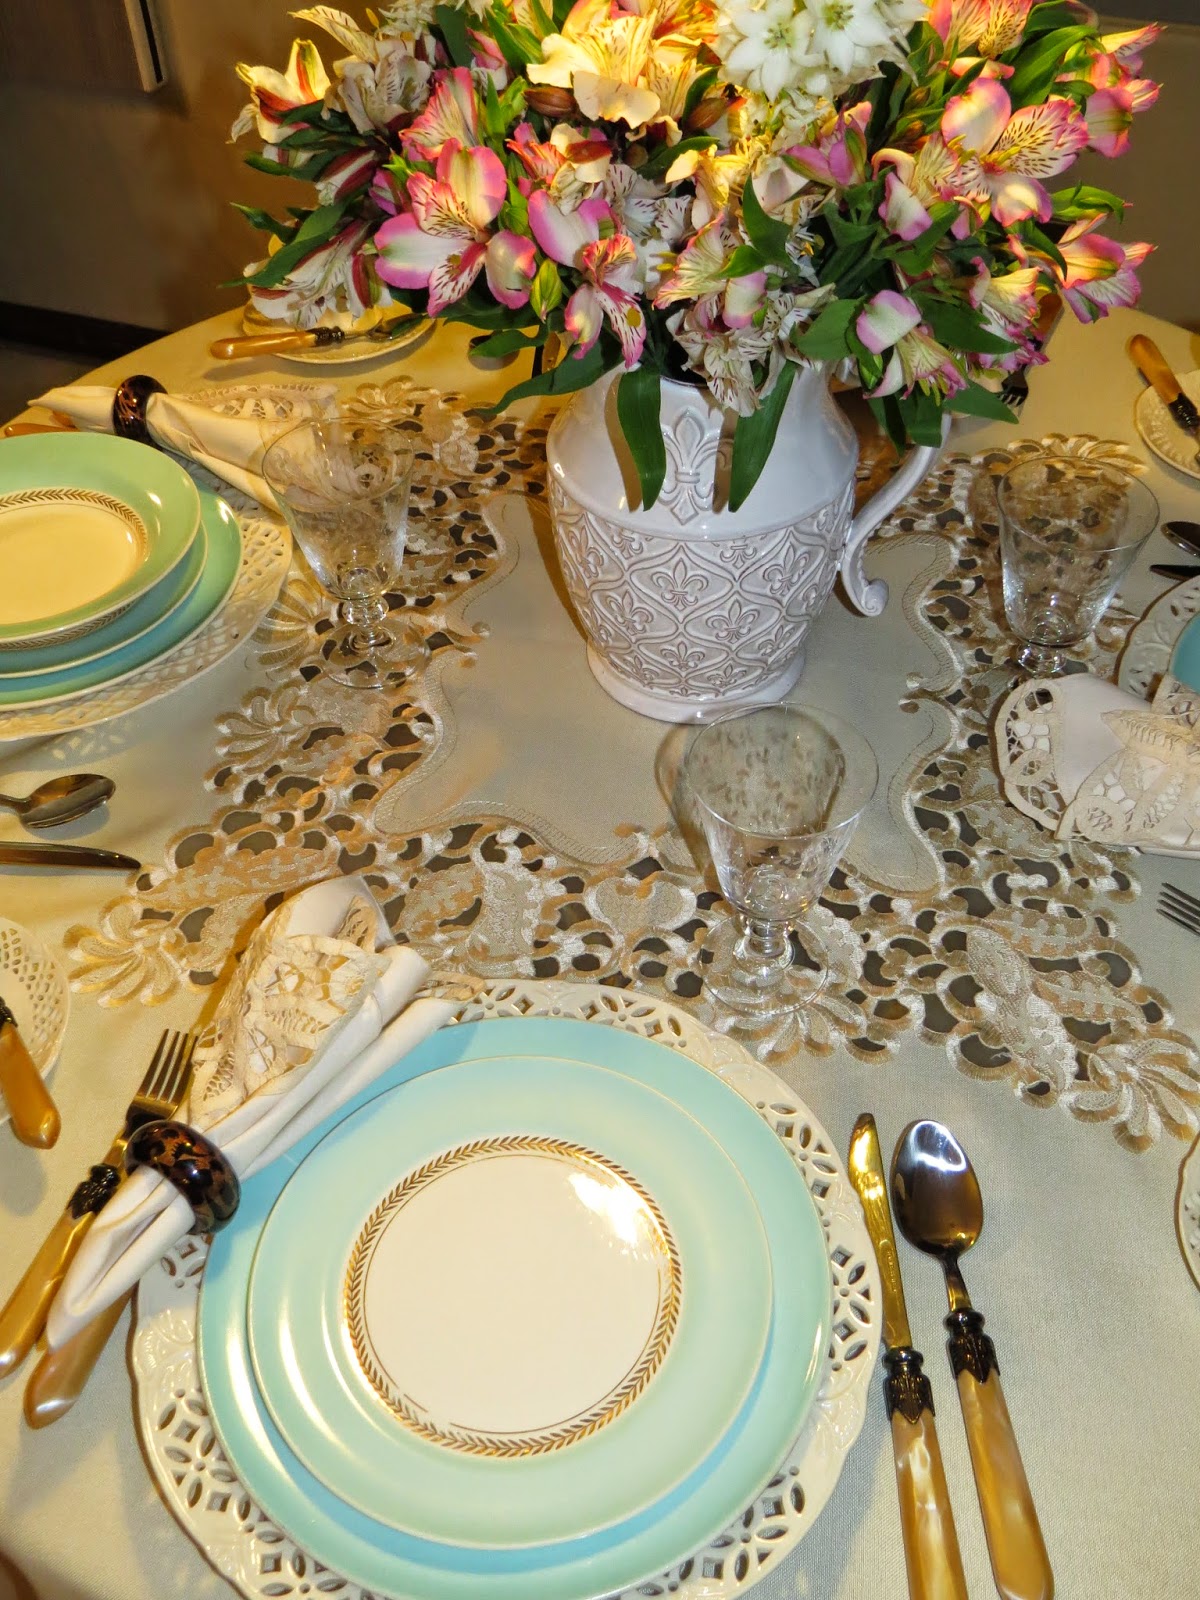 FABBY'S LIVING: FABBY: A Simple Lace Tablescape